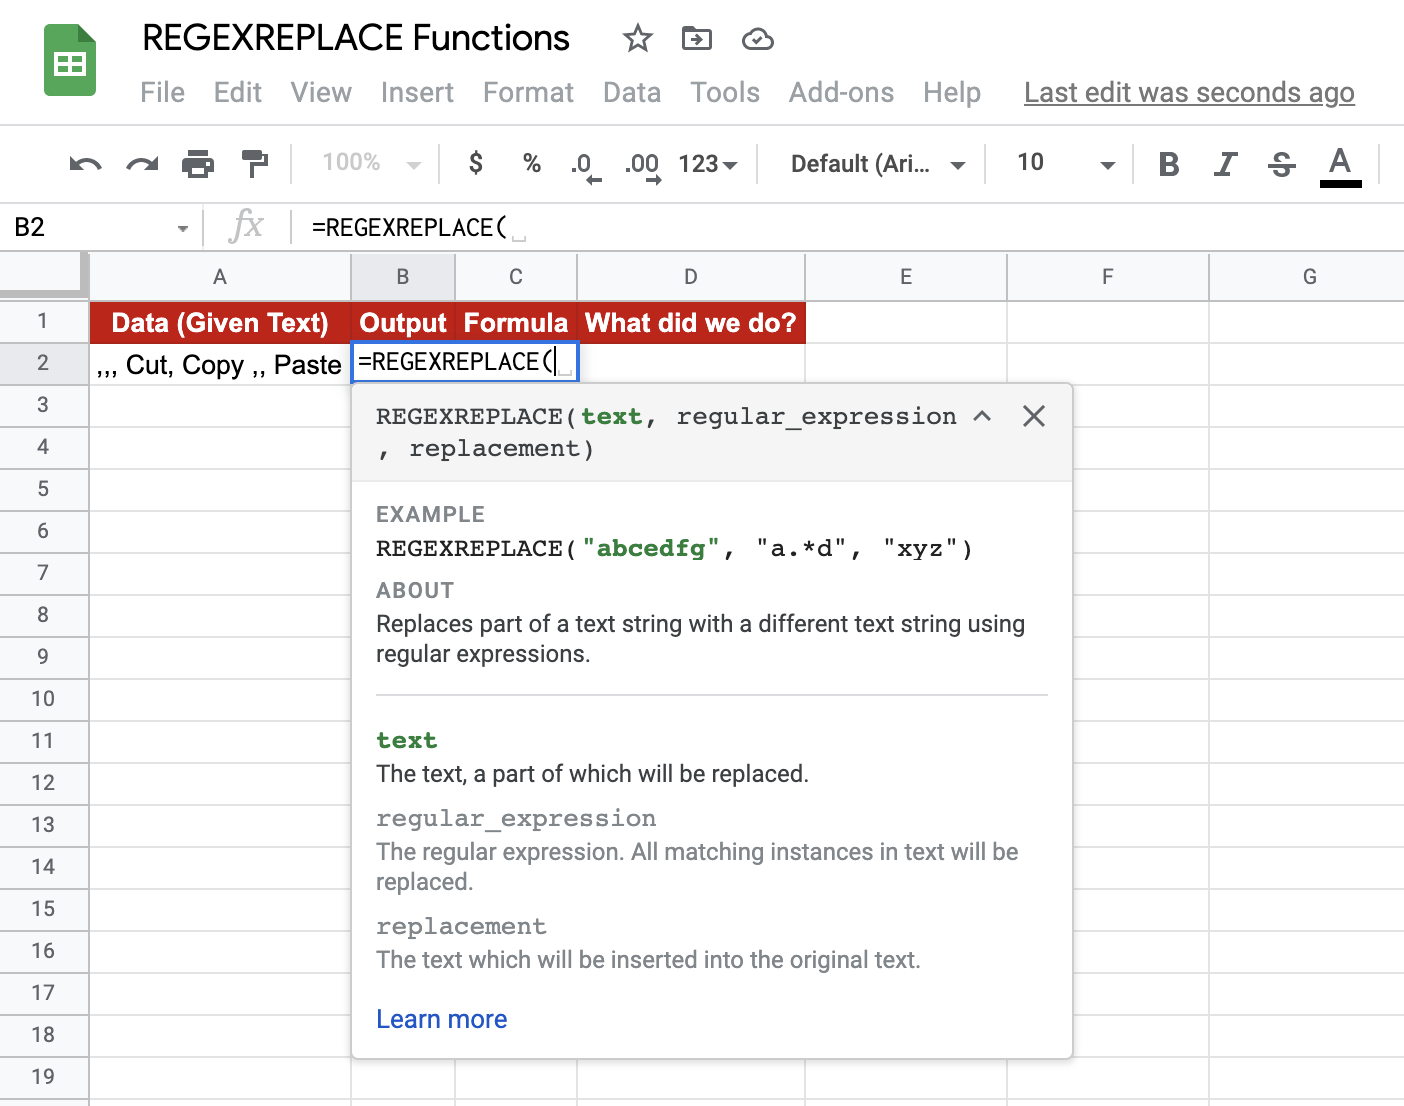 REGEXREPLACE Function in Google Sheets